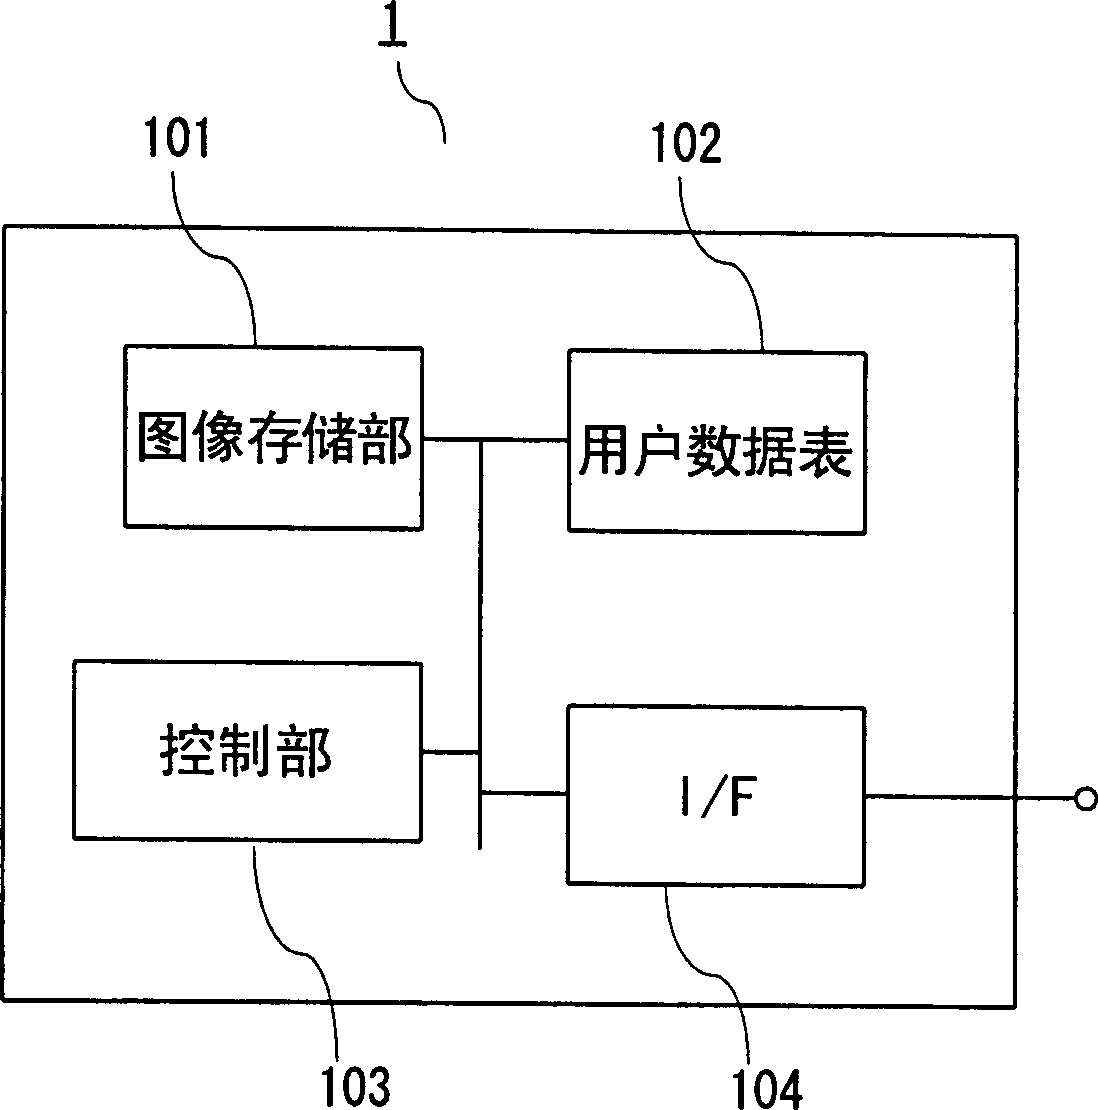 Image storage server, image storage system and remote monitor system